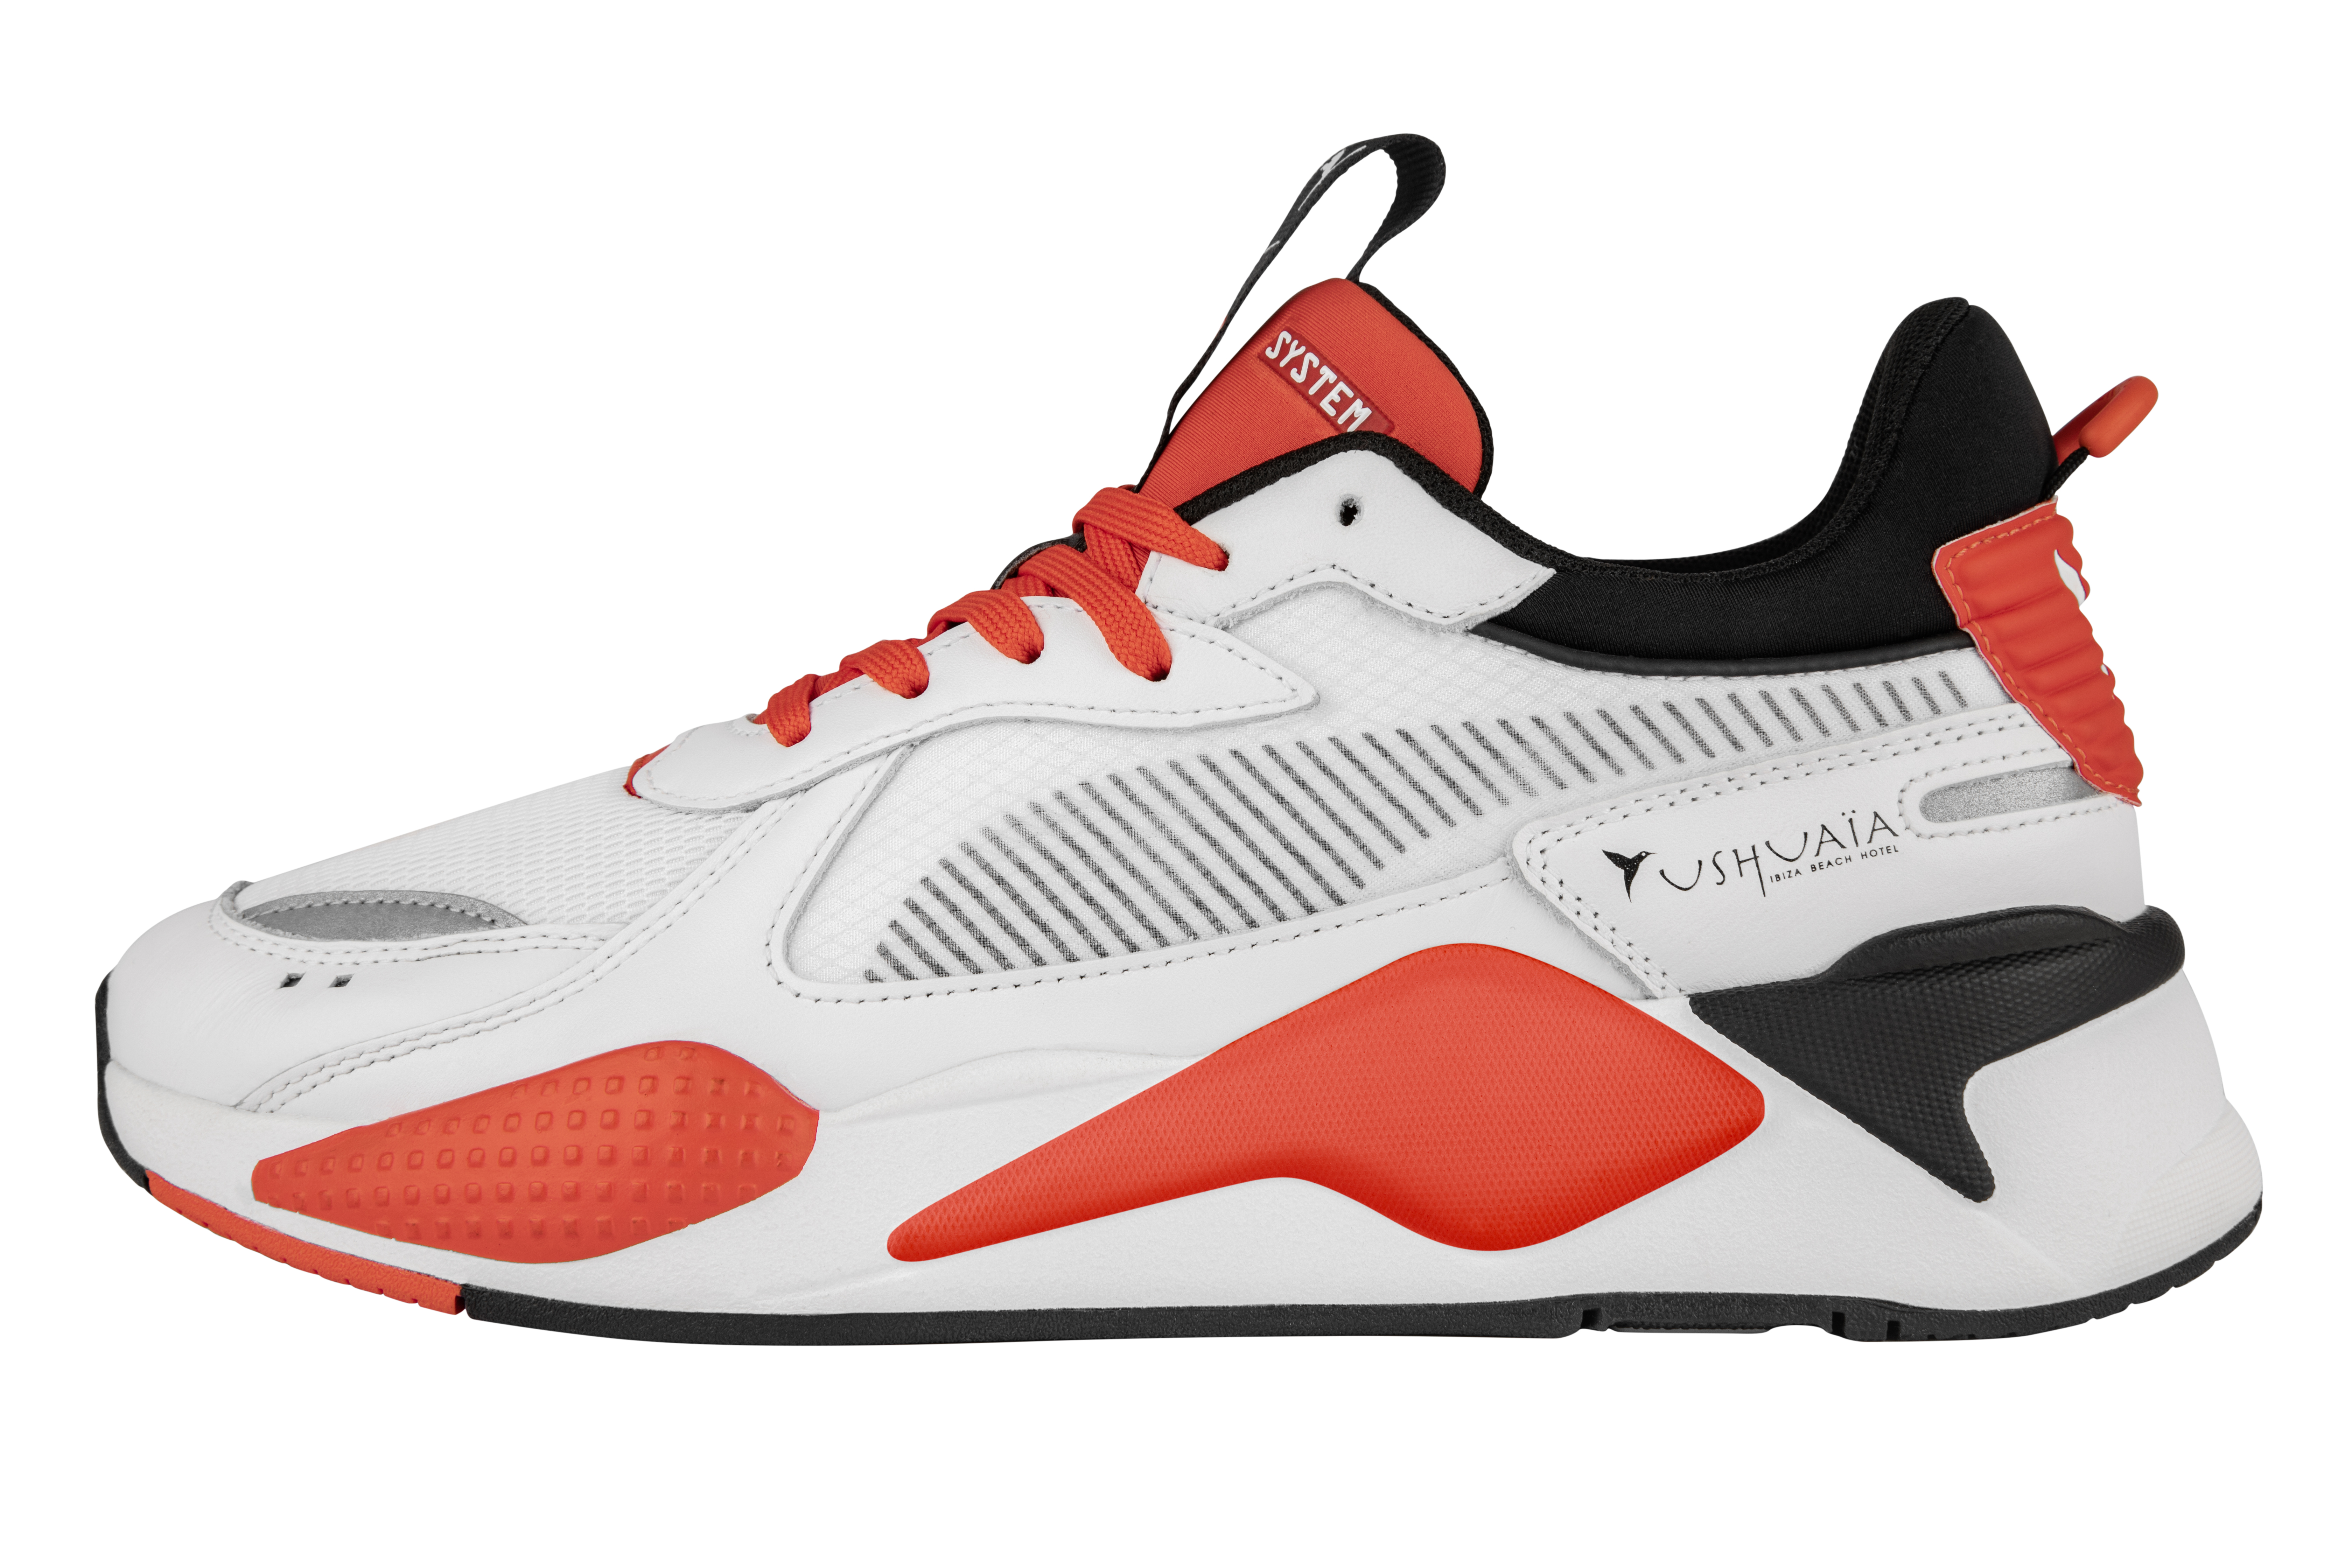 Classificeren Kaarsen motor PUMA RS-X x Ushuaïa Sneaker is limited edition | MANNENSTYLE